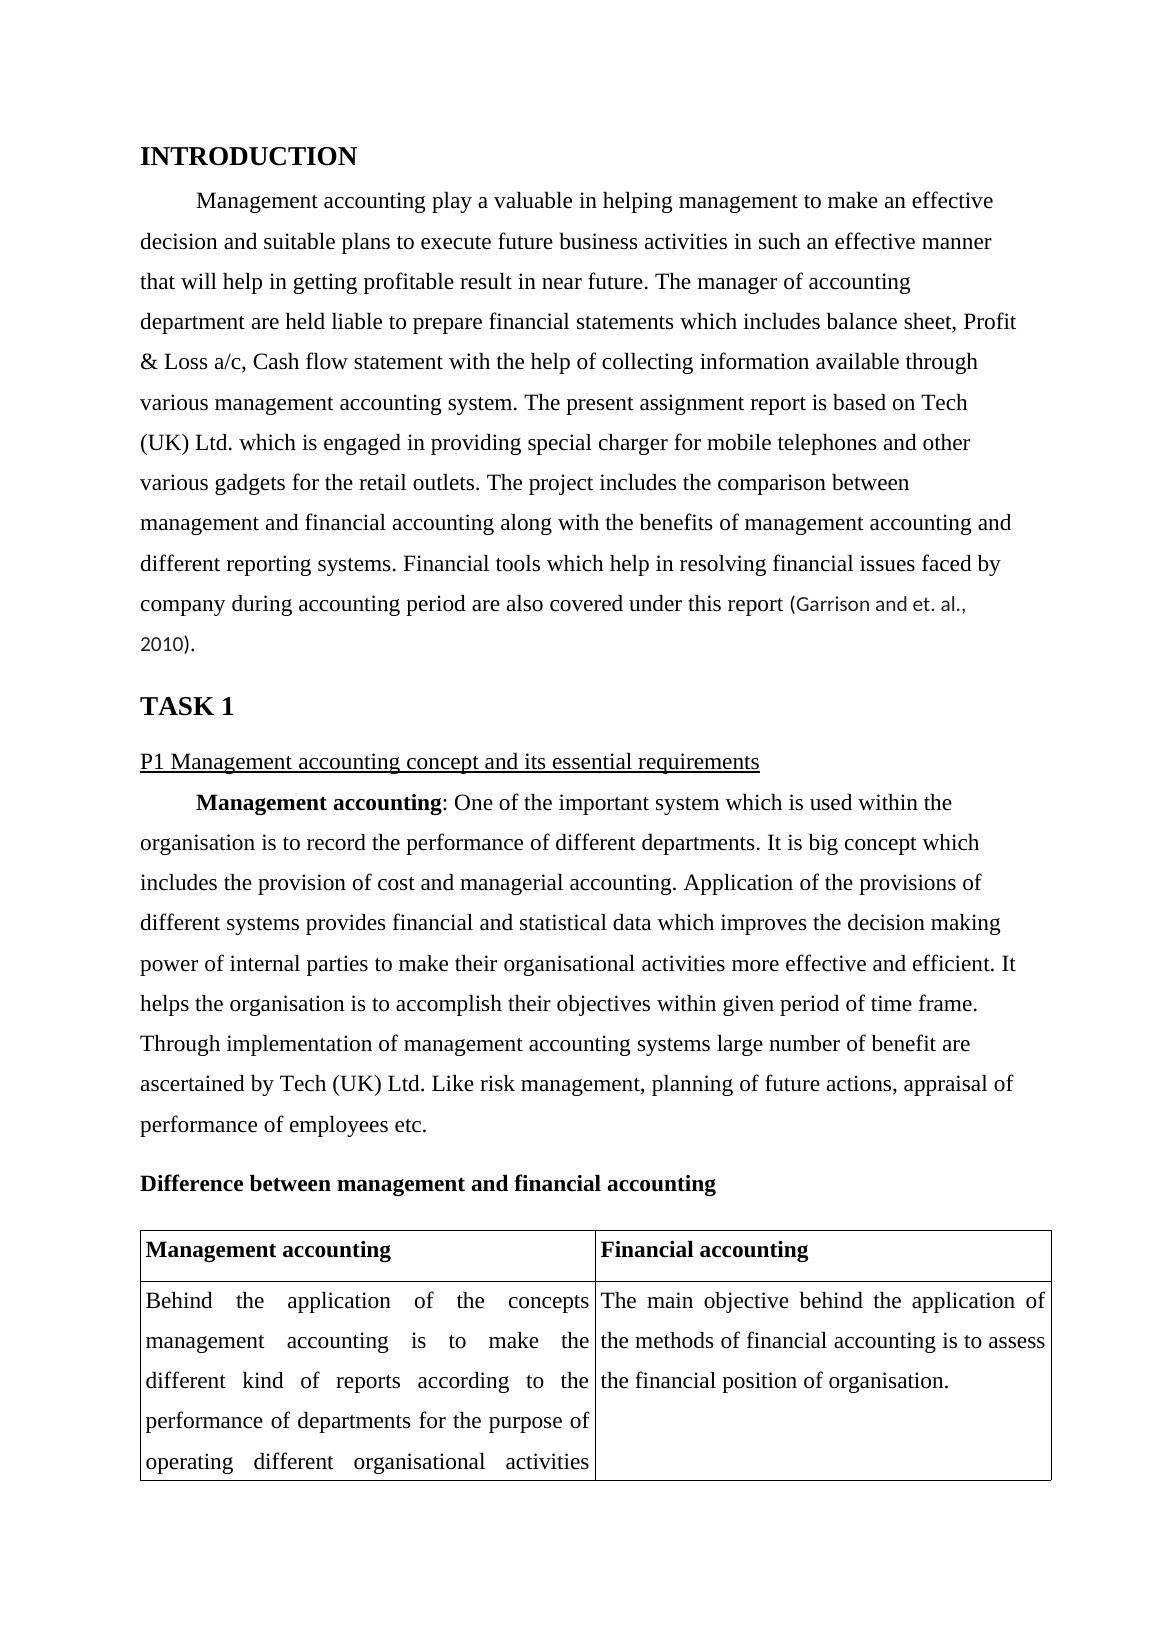 P1 Management accounting concept and its essential requirements_3